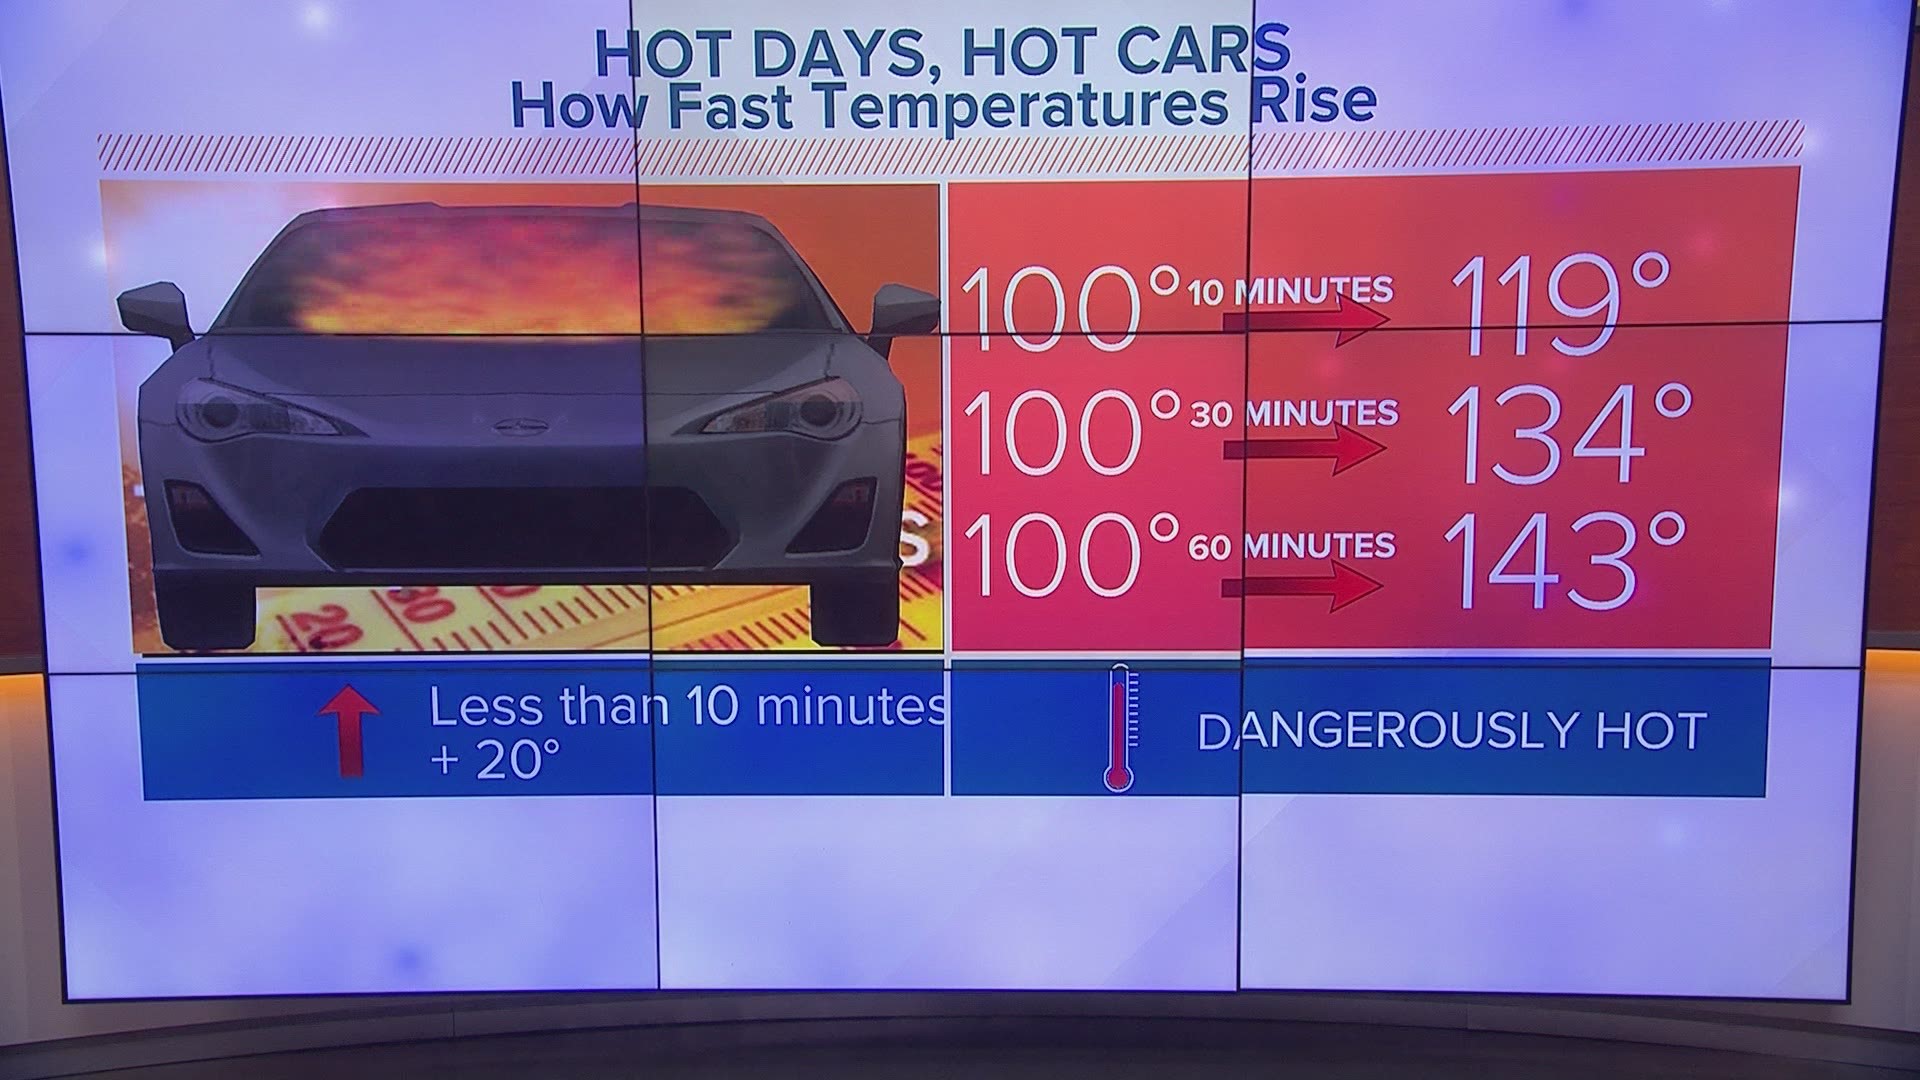 Experts are warning people to be sure pets and children are out of the car before you lock it amid forecasted triple digit temperatures.